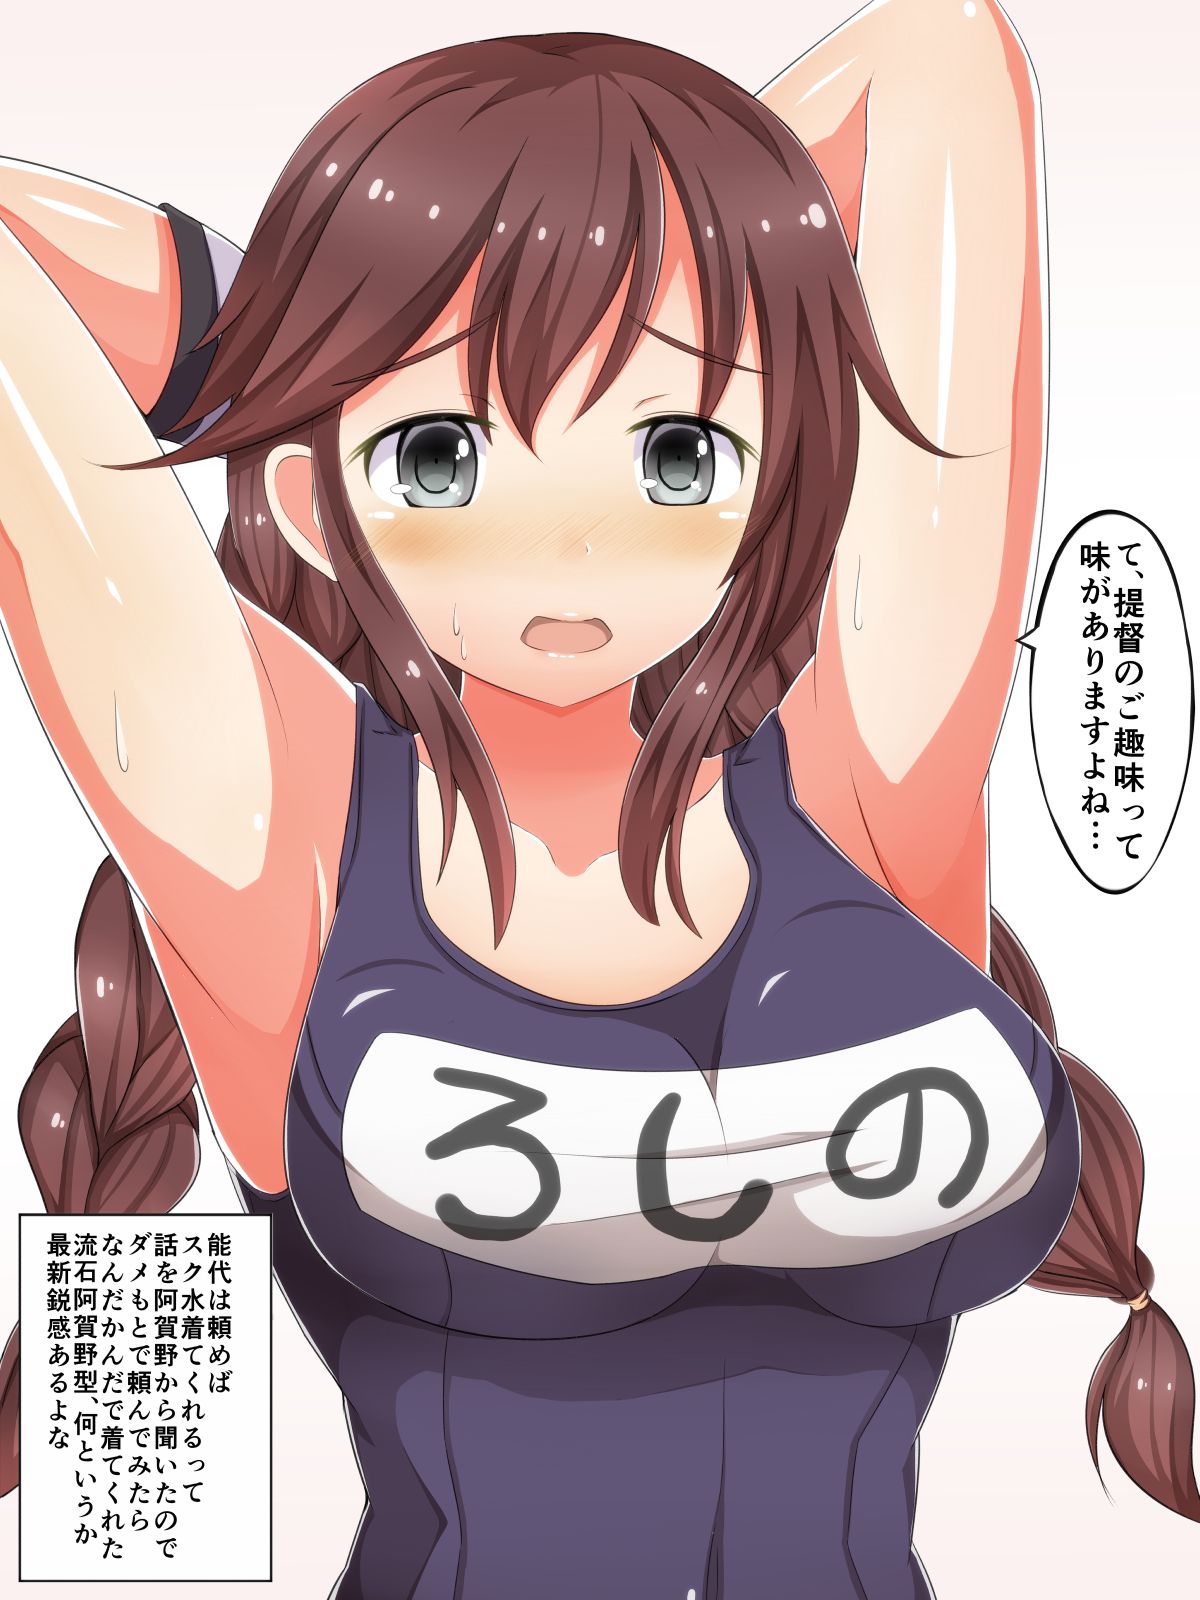 All-you-can-eat secondary erotic images of Noshiro as much as you like [Fleet Kokushon] 17